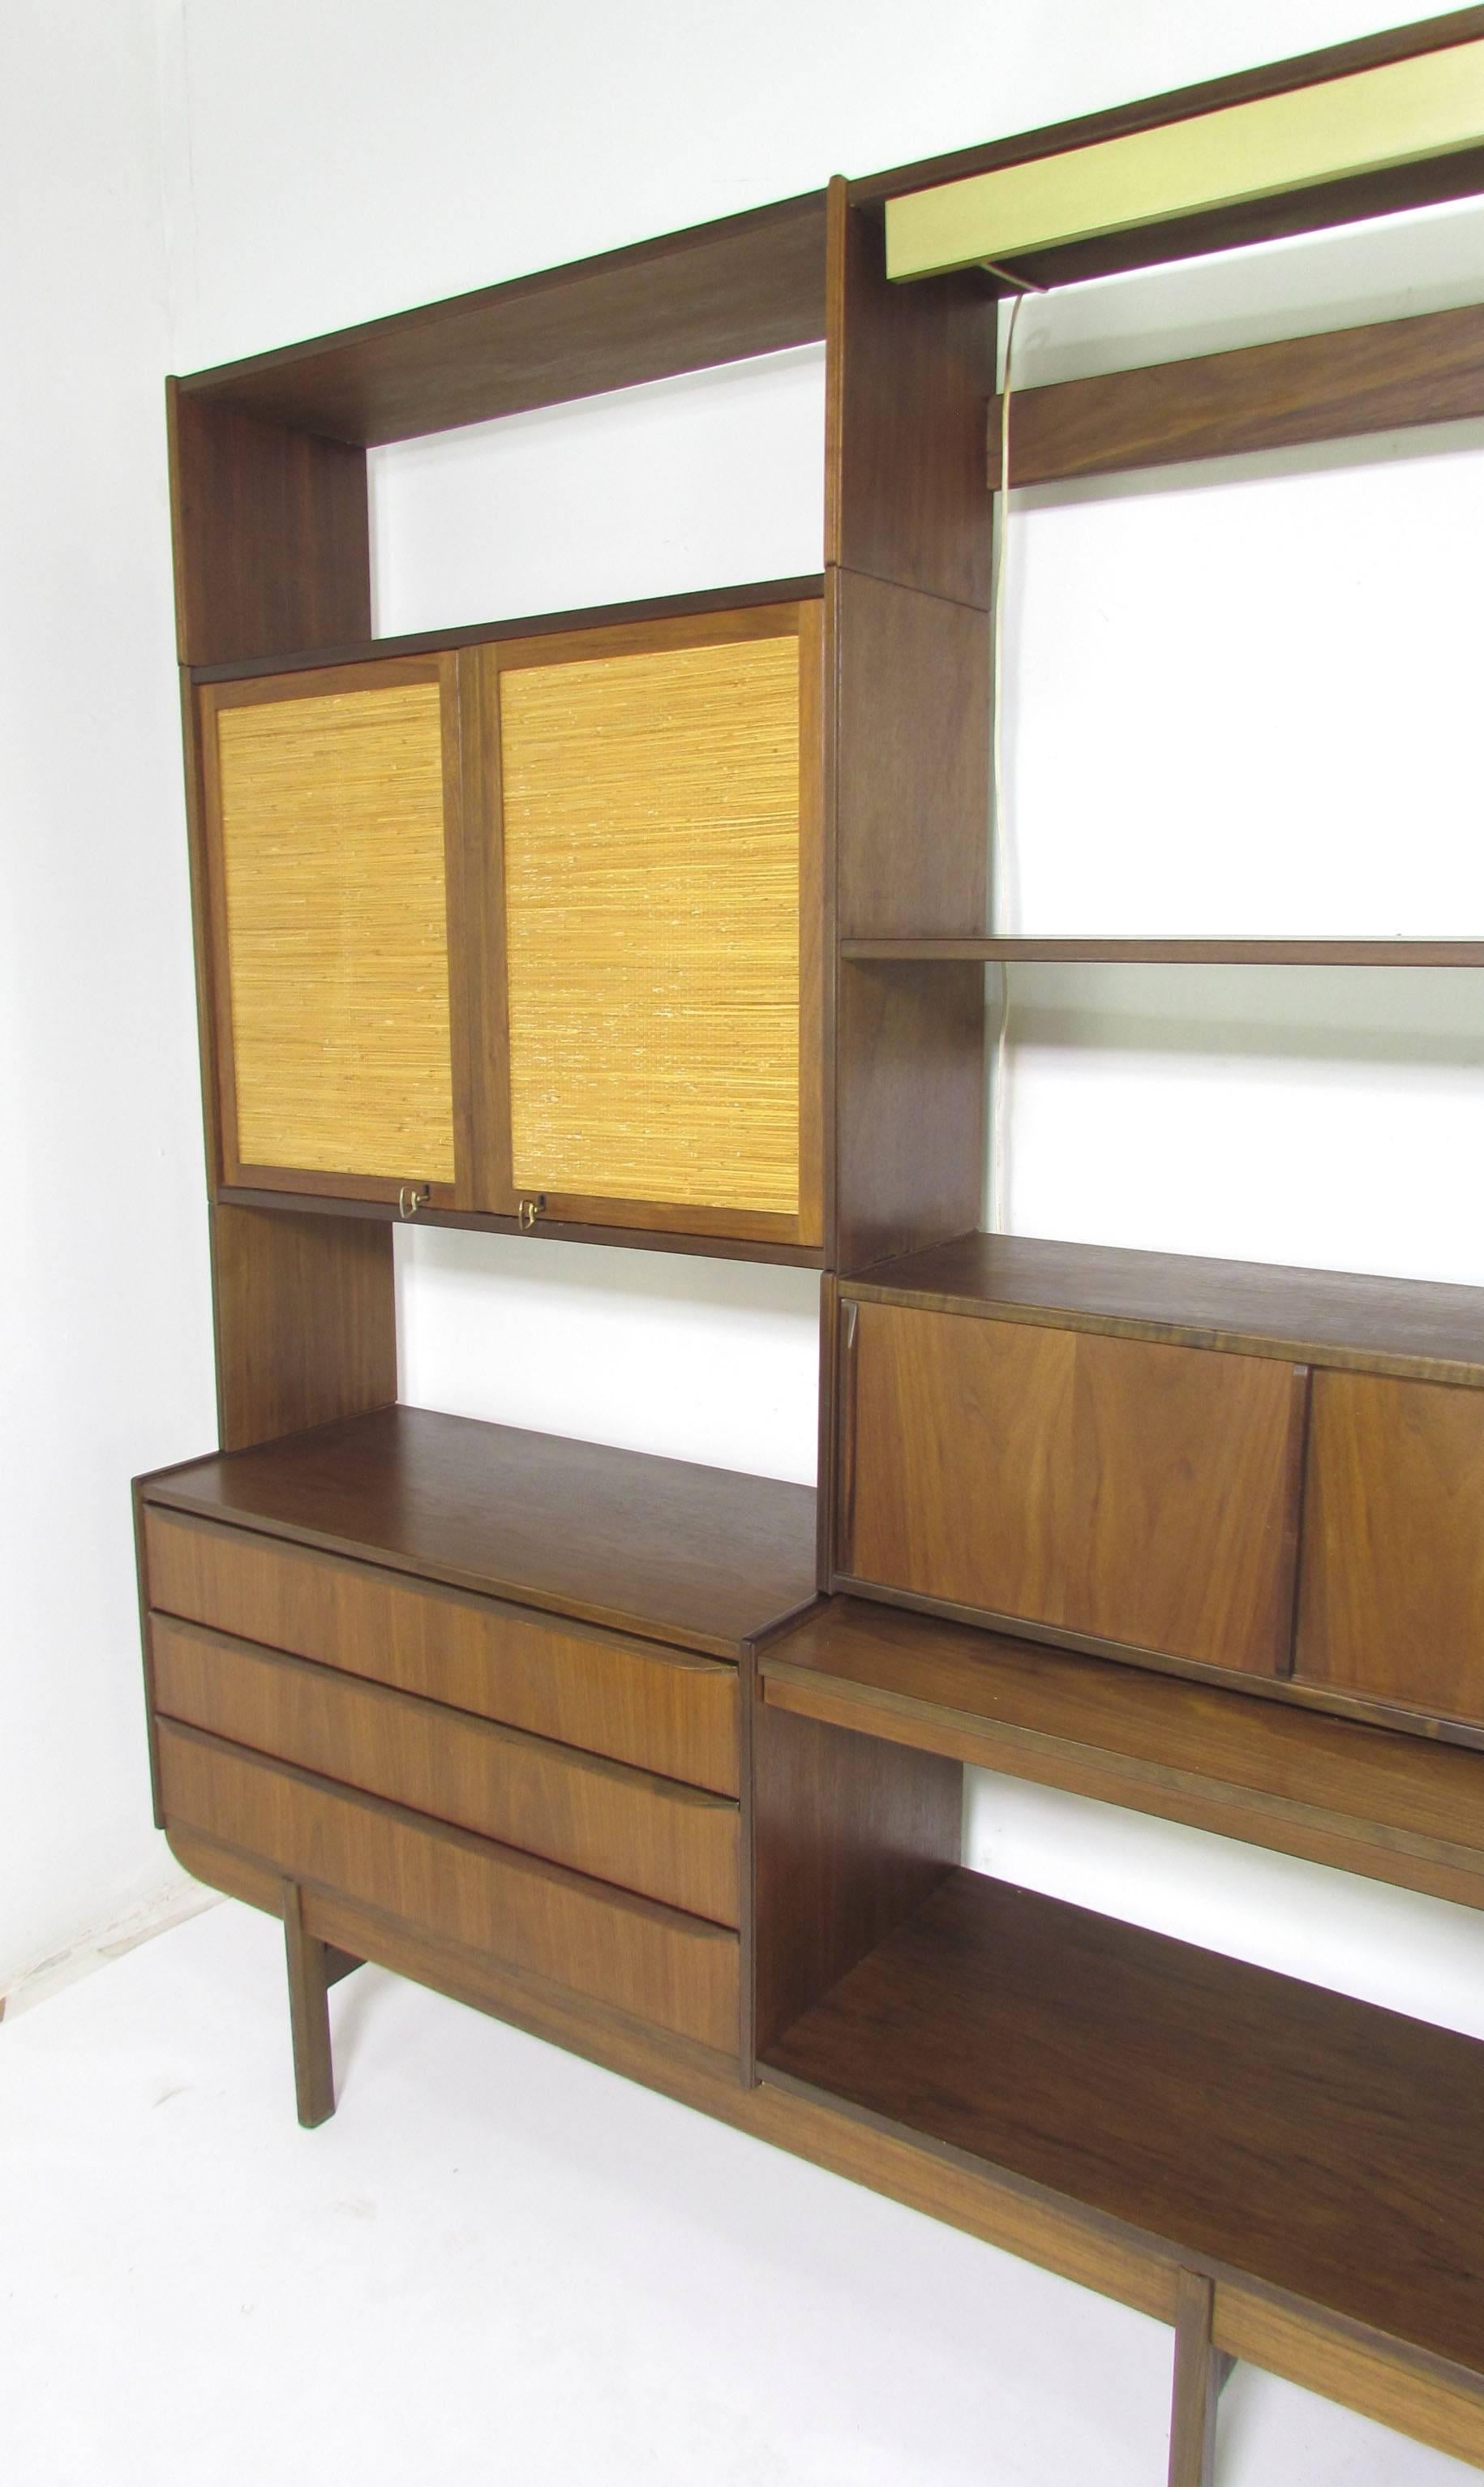 Large four bay freestanding wall unit, circa 1960s. Various drawers and storage compartments, and a pull-out writing desk surface. Mounted with an overhead Lightolier fixture. Four original keys for the cane-front cabinets.